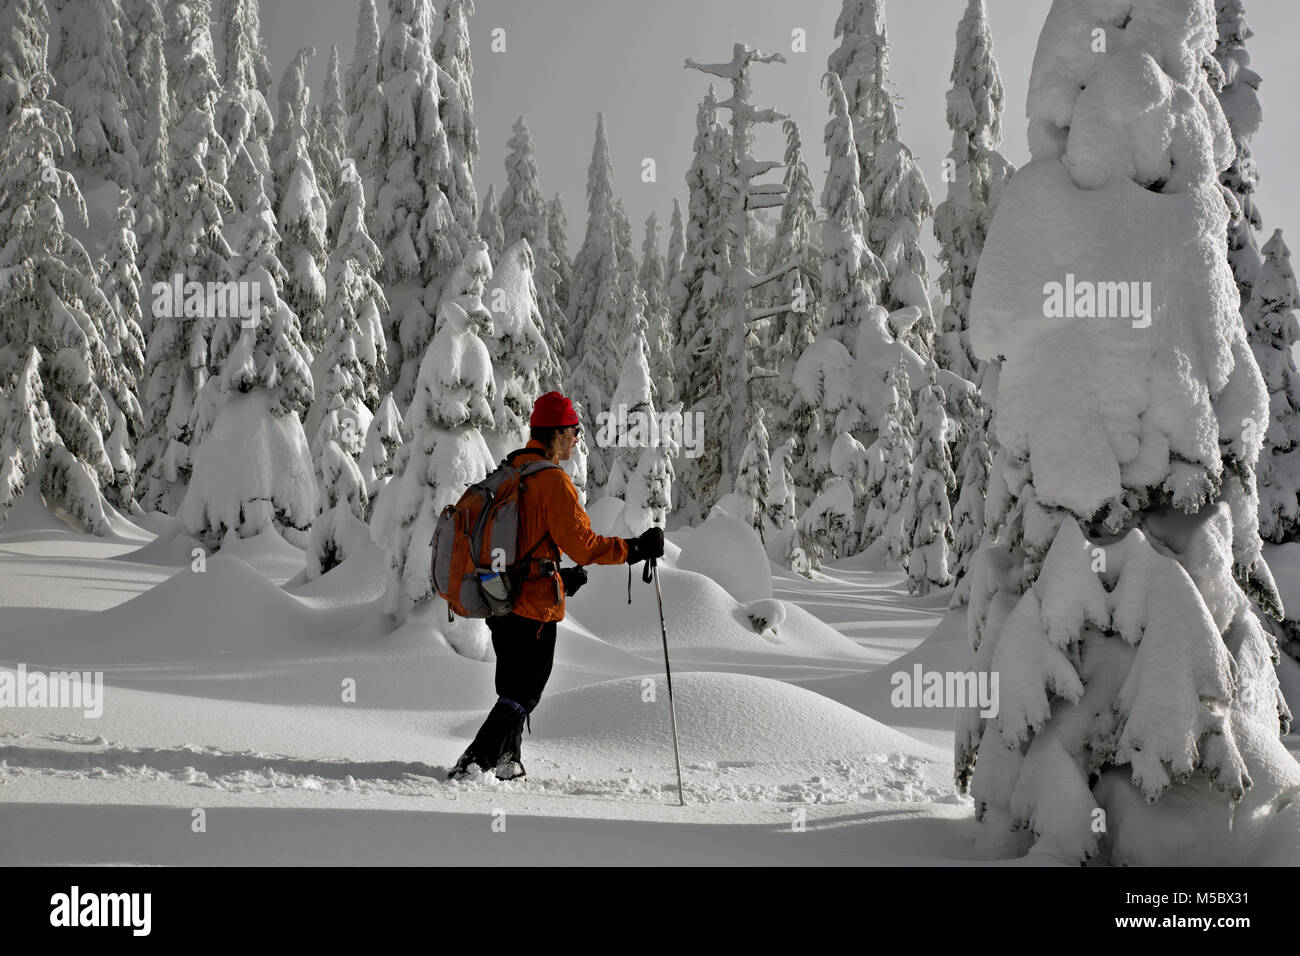 .WASHINGTON - Cross-country skiing among the snow covered trees near the summit of Amabilis Mountain in the Okanogan-Wenatchee National Forest. Stock Photo